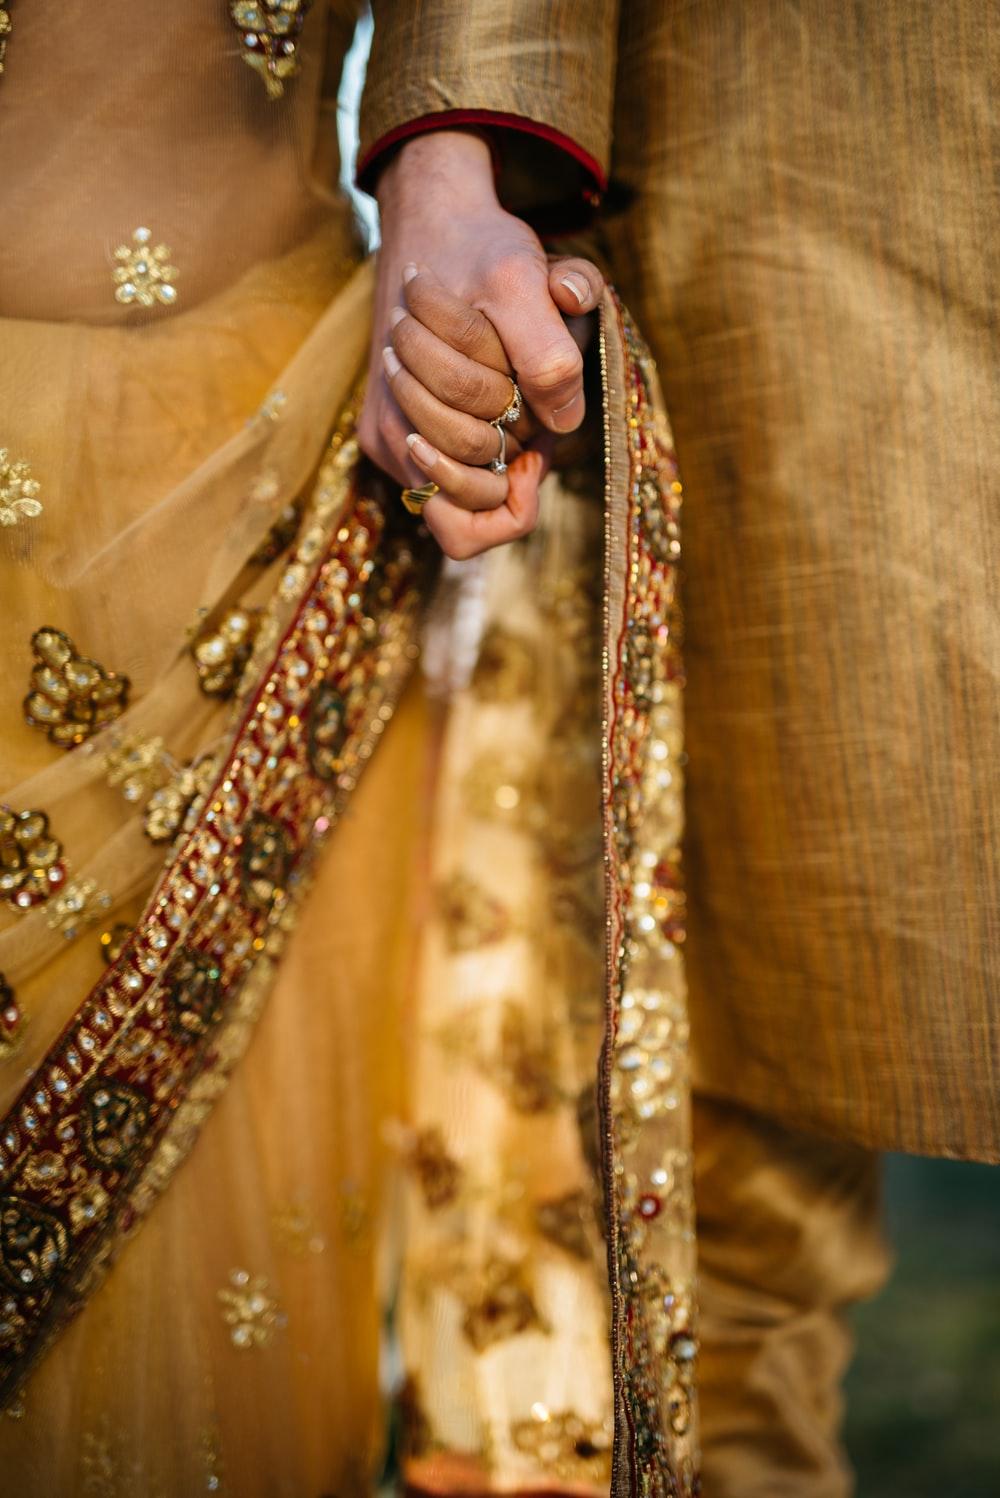 Indian Marriage Picture. Download Free Image